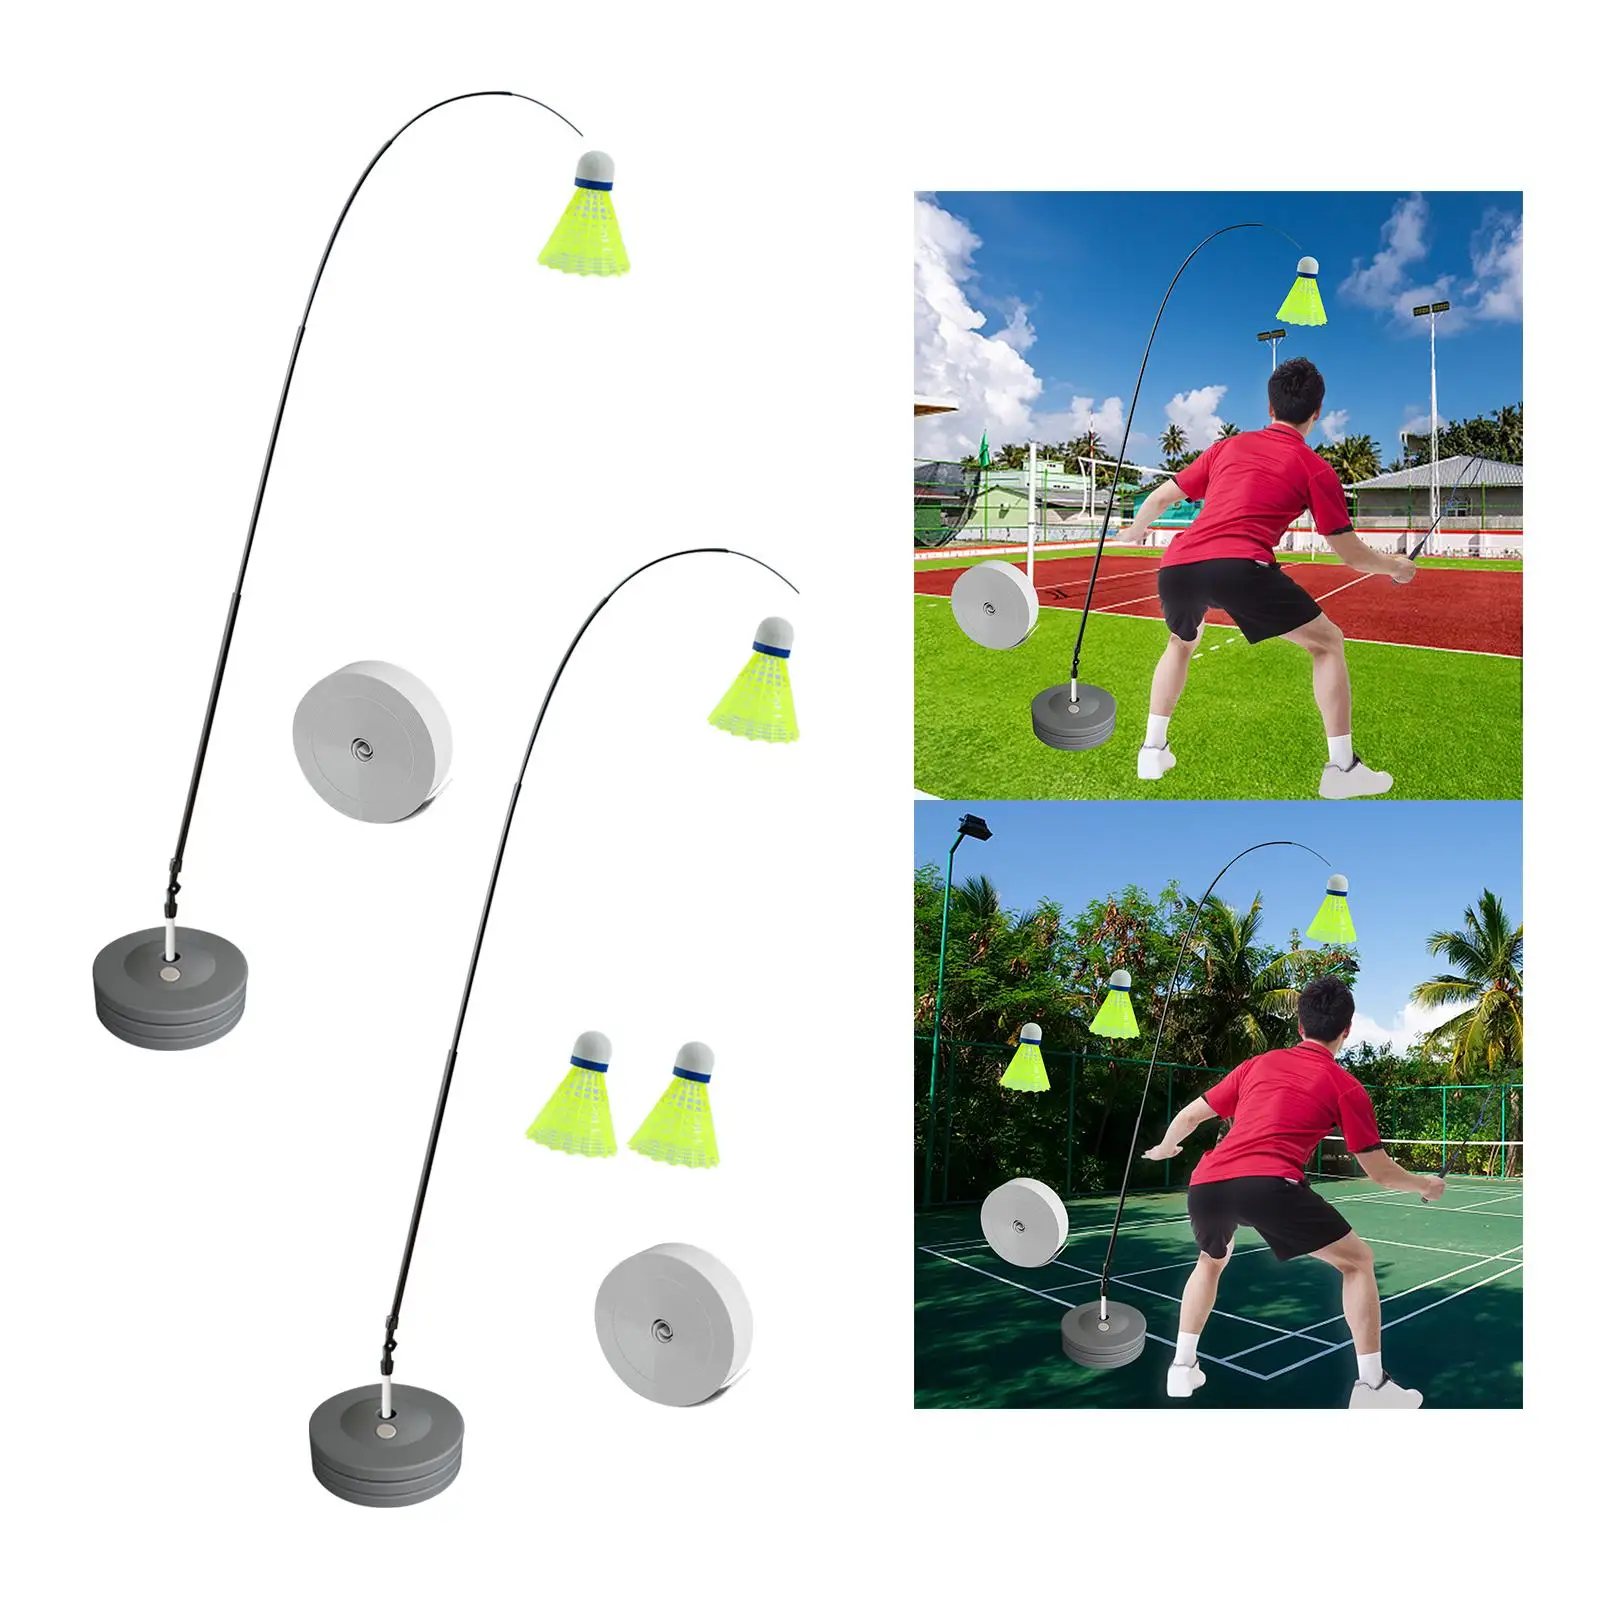 Badminton Solo Exercise Equipment Portable Self Practice Tool Stretchy for Outdoor Backyard